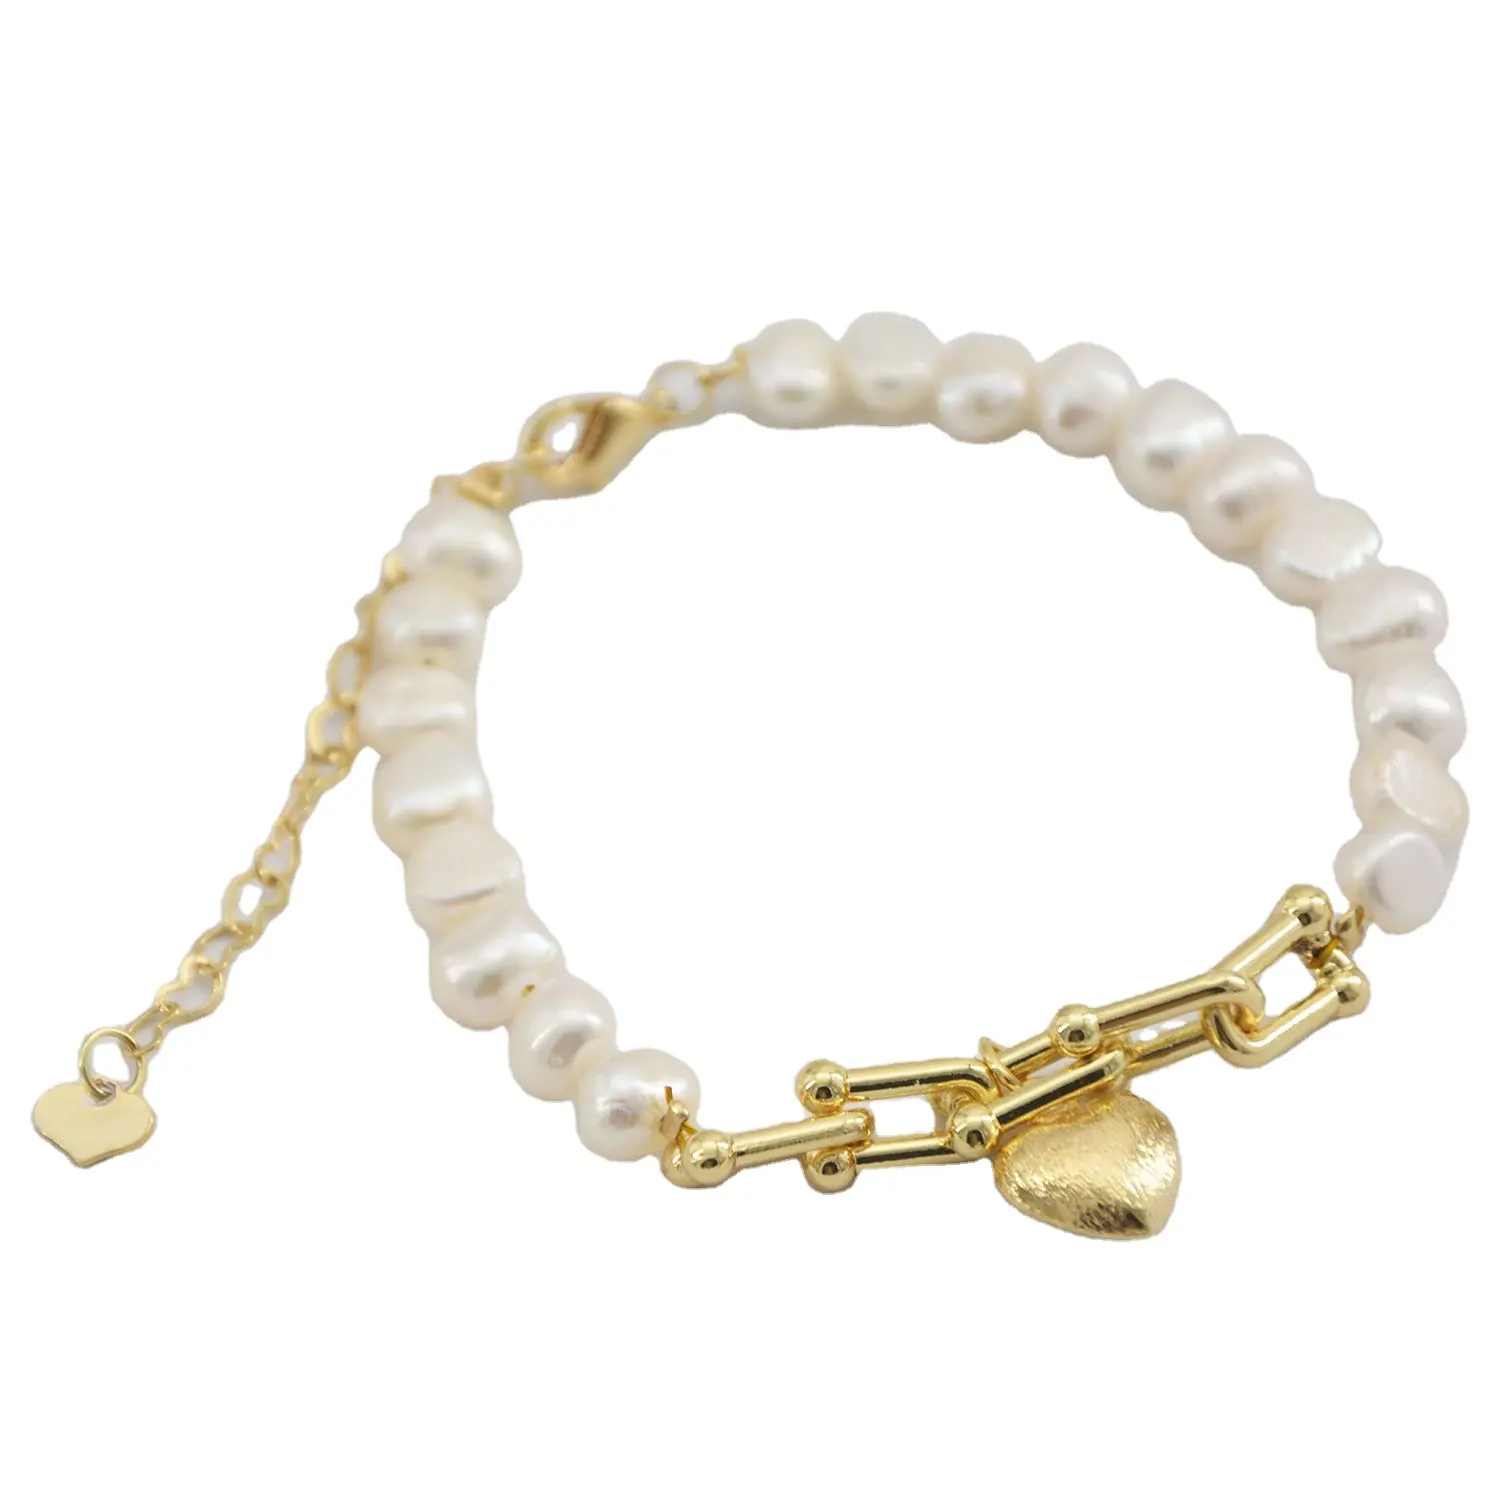 Fashion jewelry 14K gold plated stainless steel frosted heart charm pearl women's bracelet